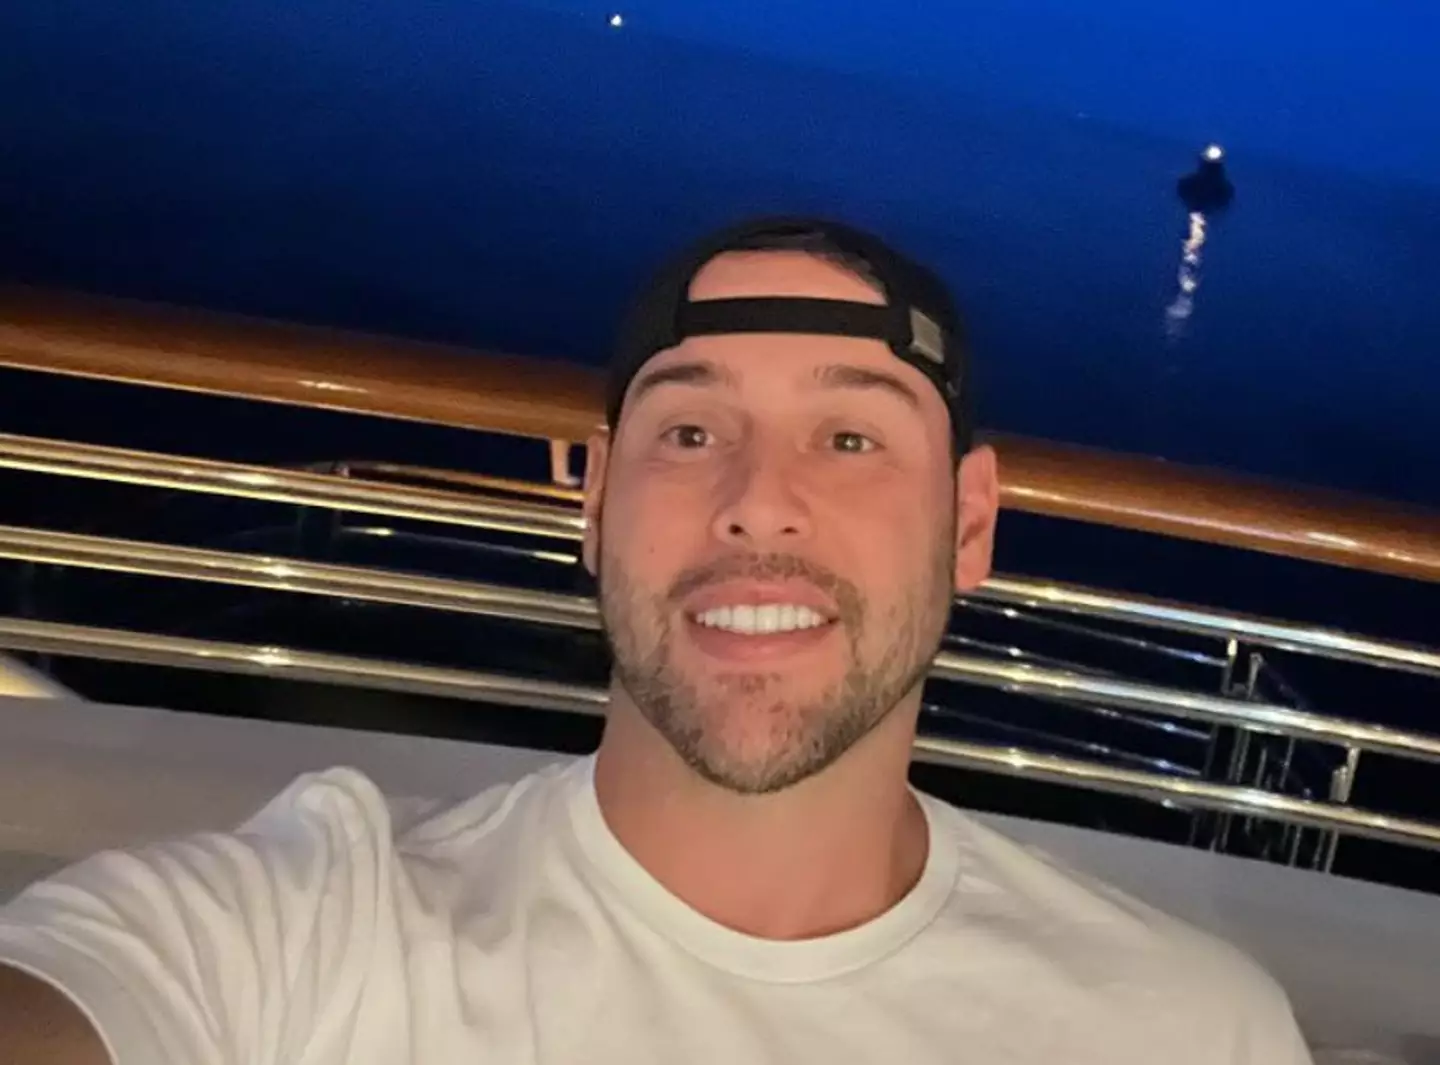 Scooter Braun's company is SB Projects.